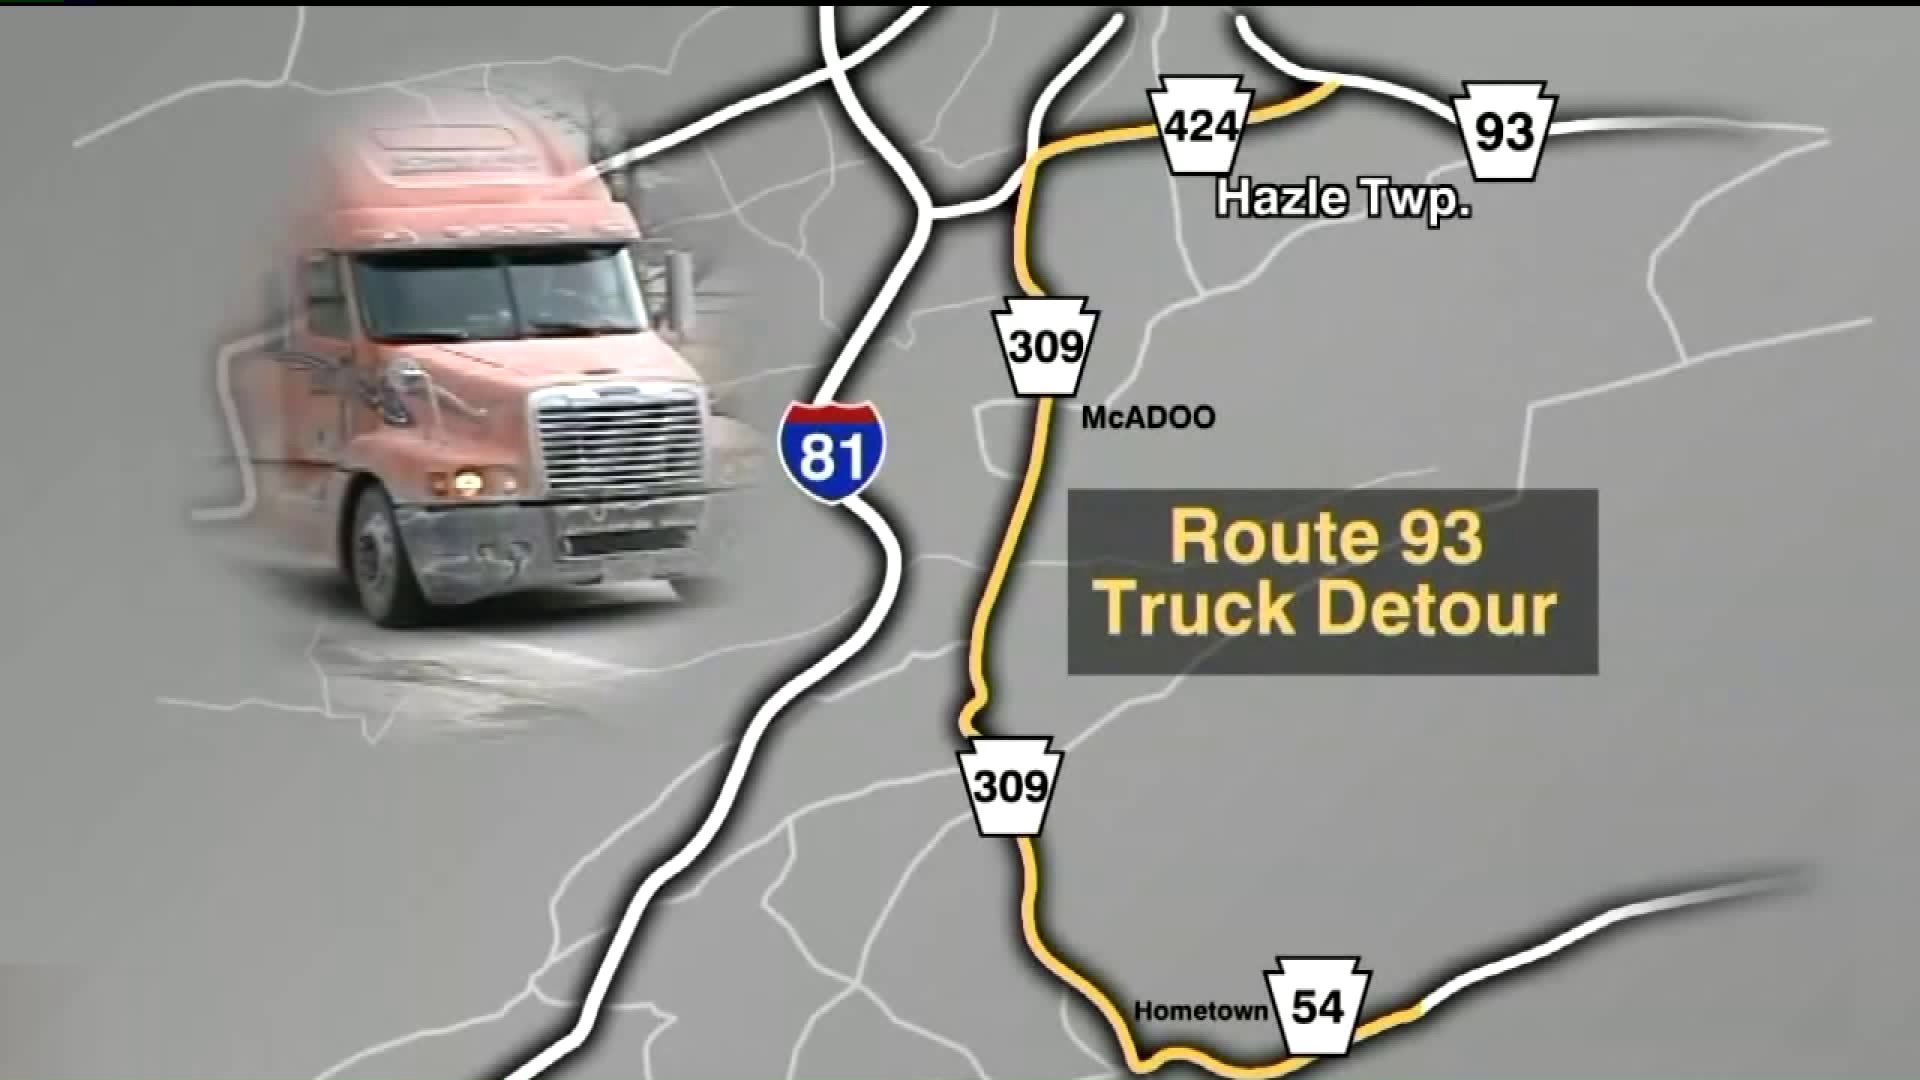 Tractor Trailer Ban Signs Installed on Route 93